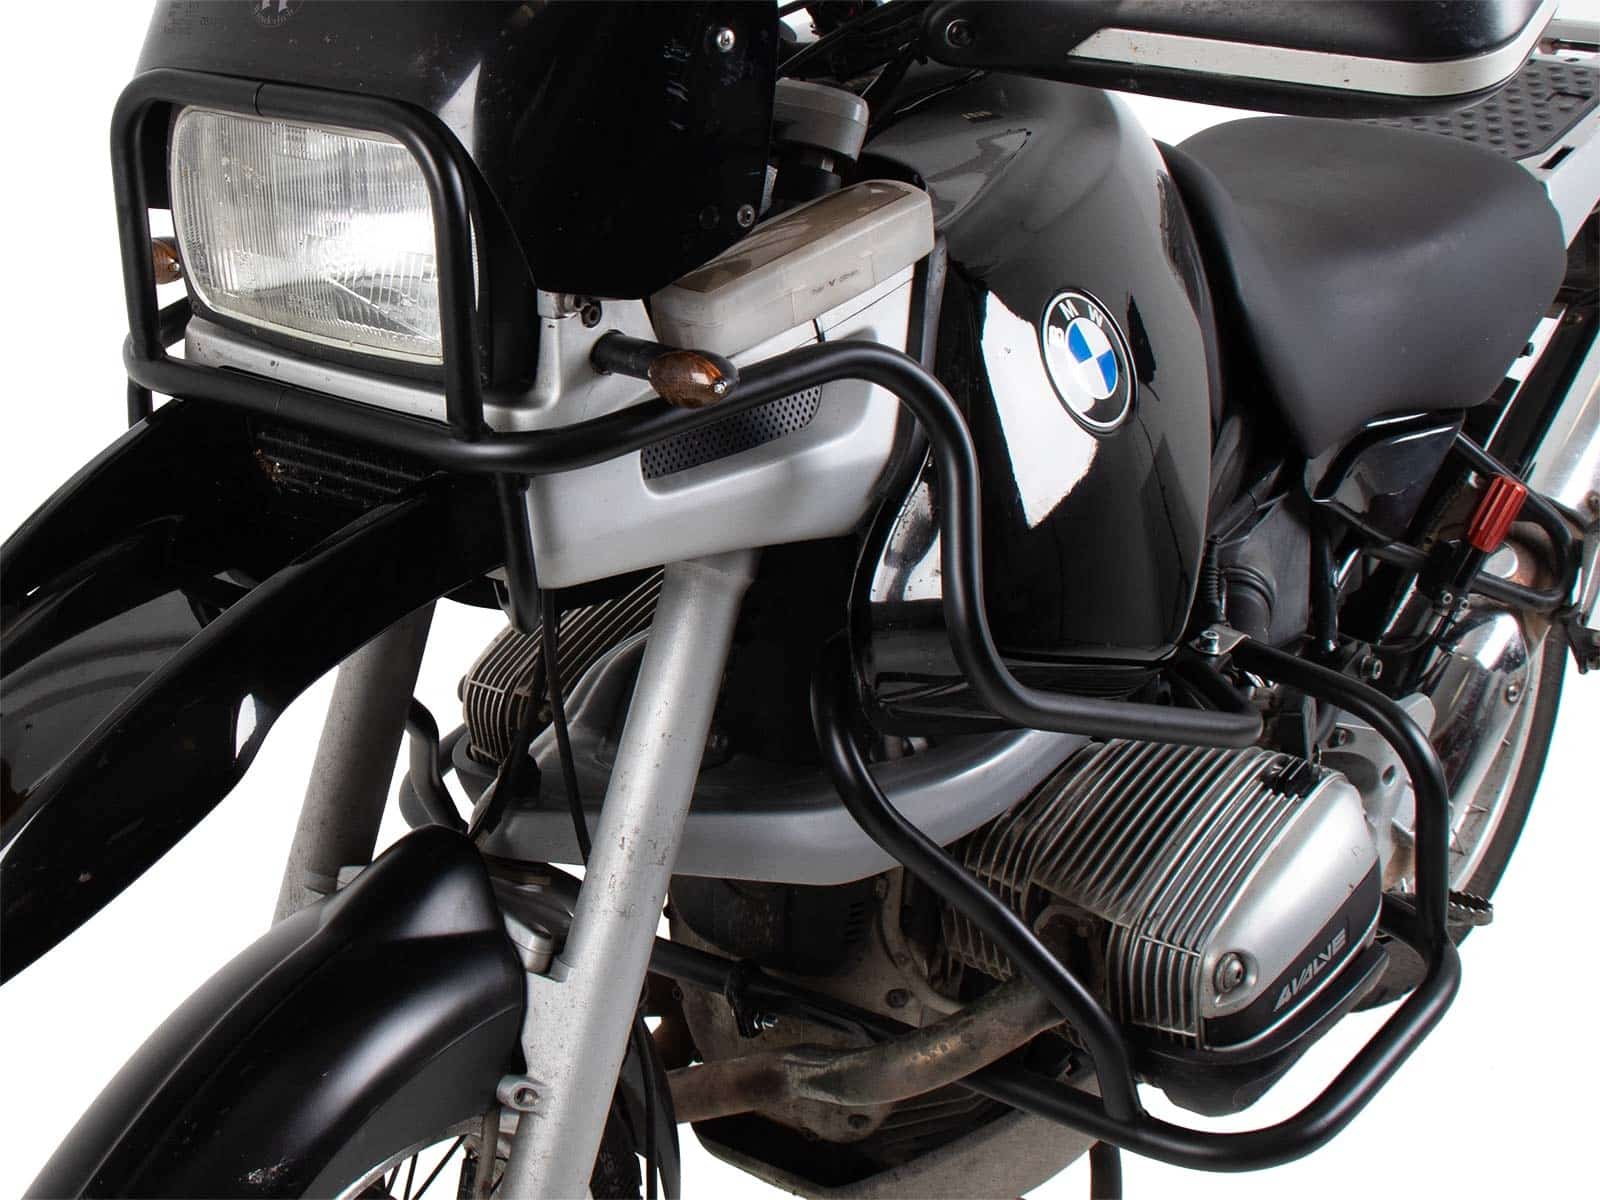 Engine protection bar black for BMW R 850 GS (1998-2000)/R 1100 GS (1994-1999) *please state year of constrution*